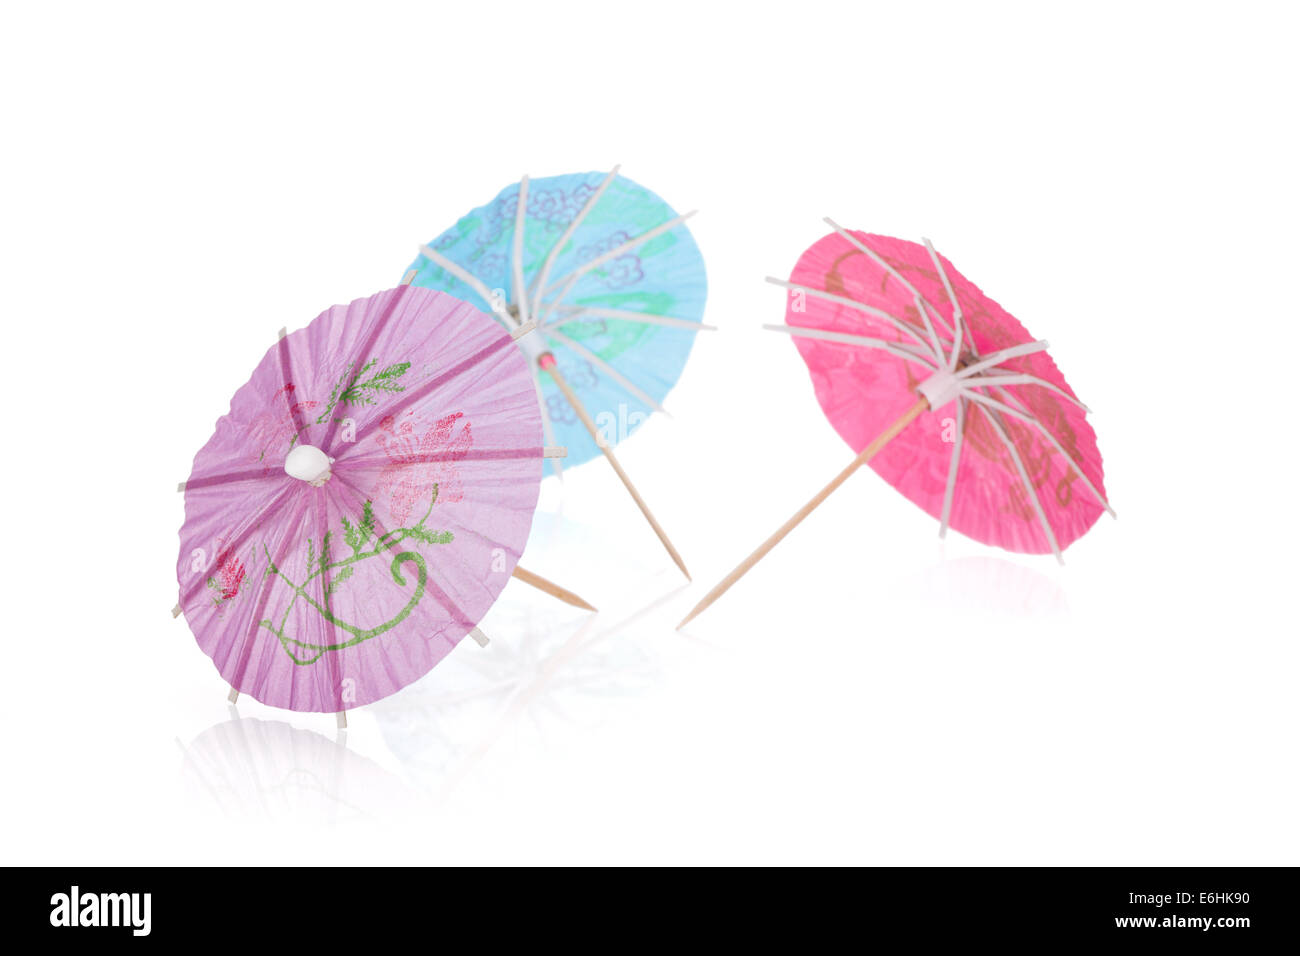 Three colored cocktail umbrellas. Isolated on white background Stock Photo